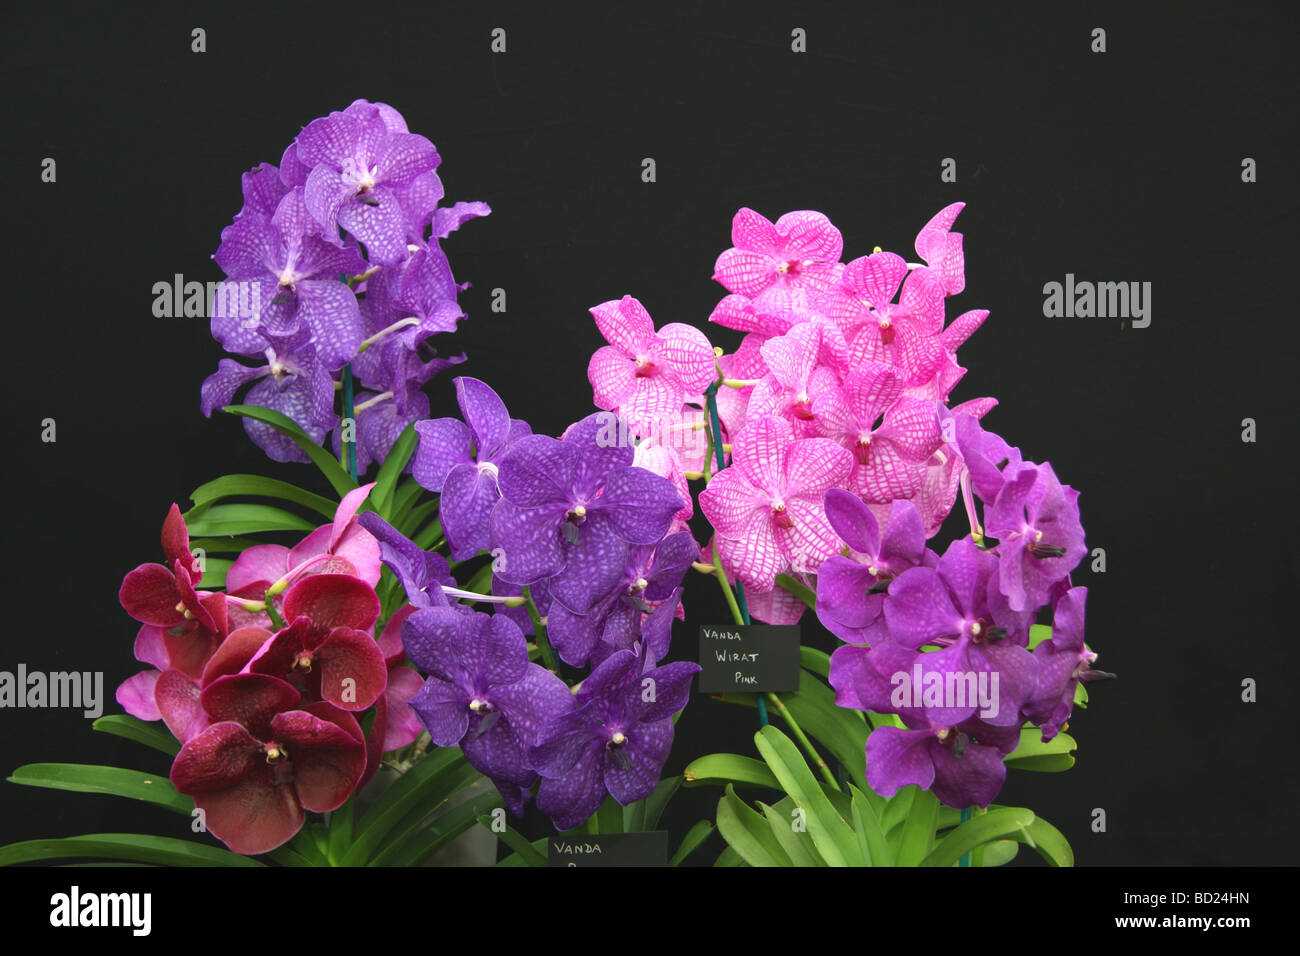 Vanda Orchids on display at RHS Tatton Park show Stock Photo